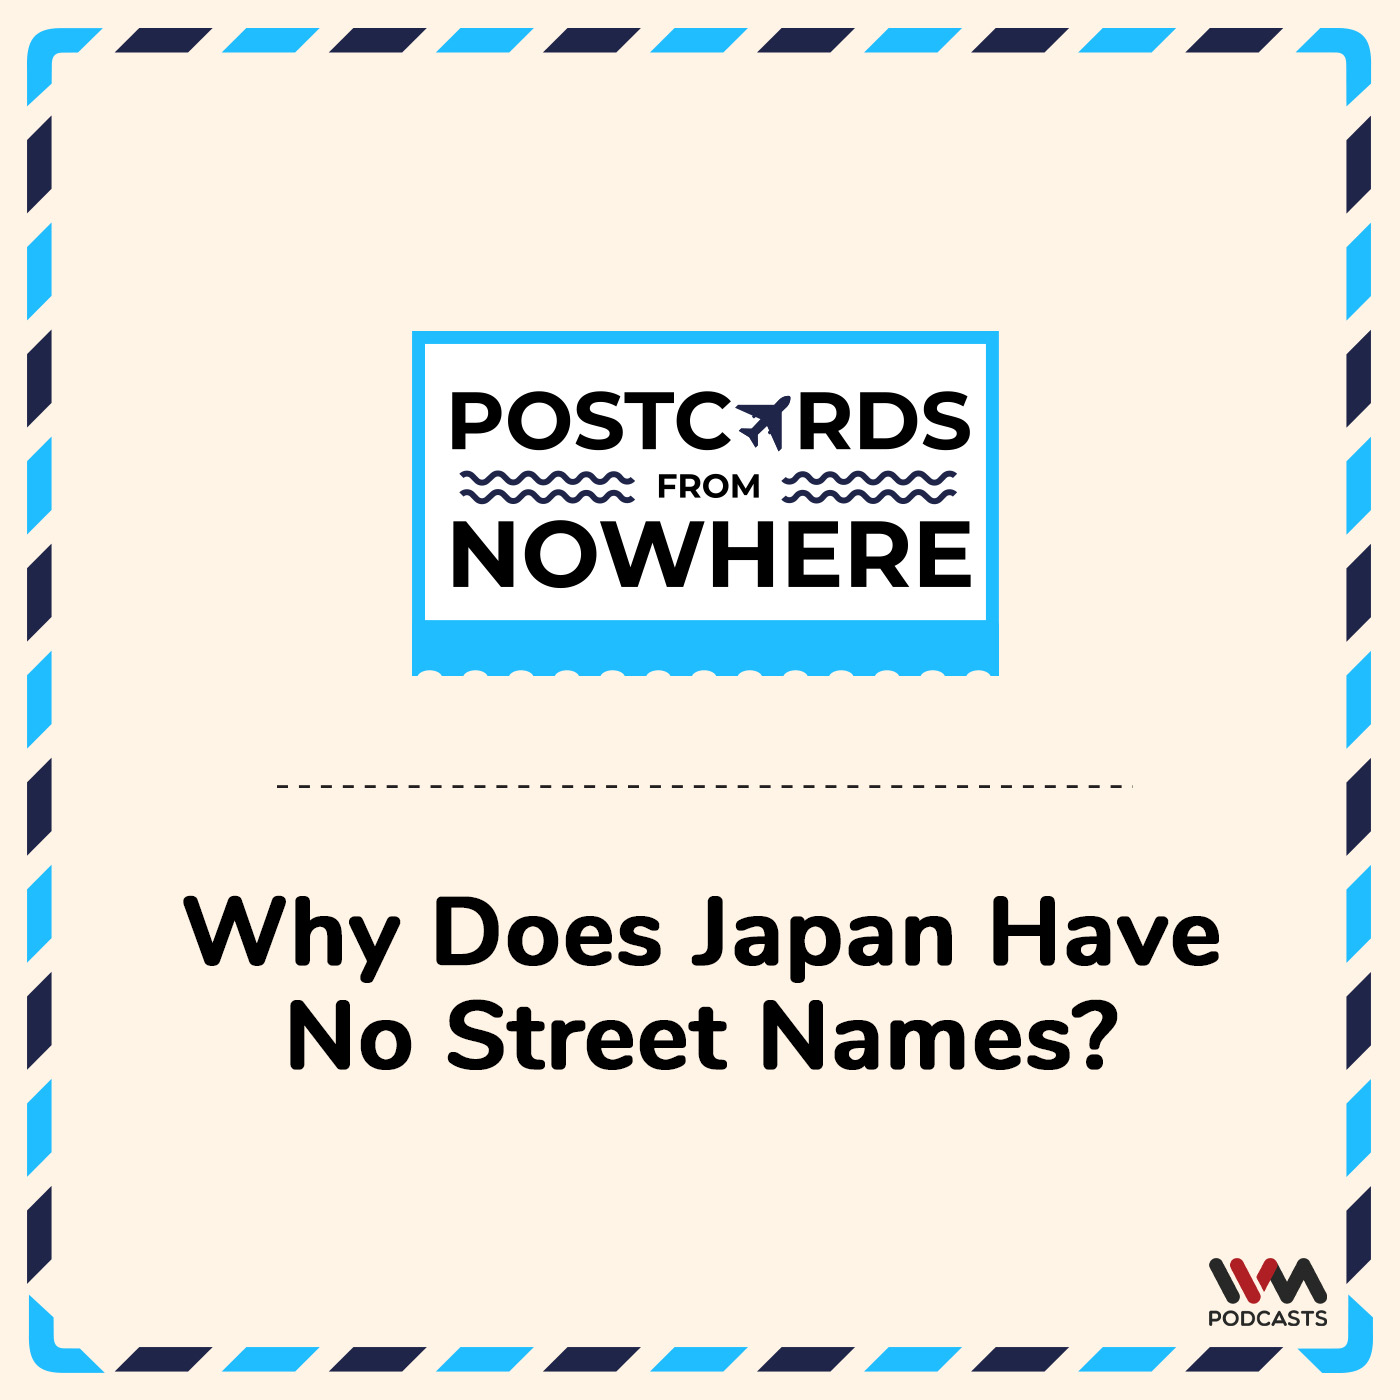 Why does Japan have no street names?